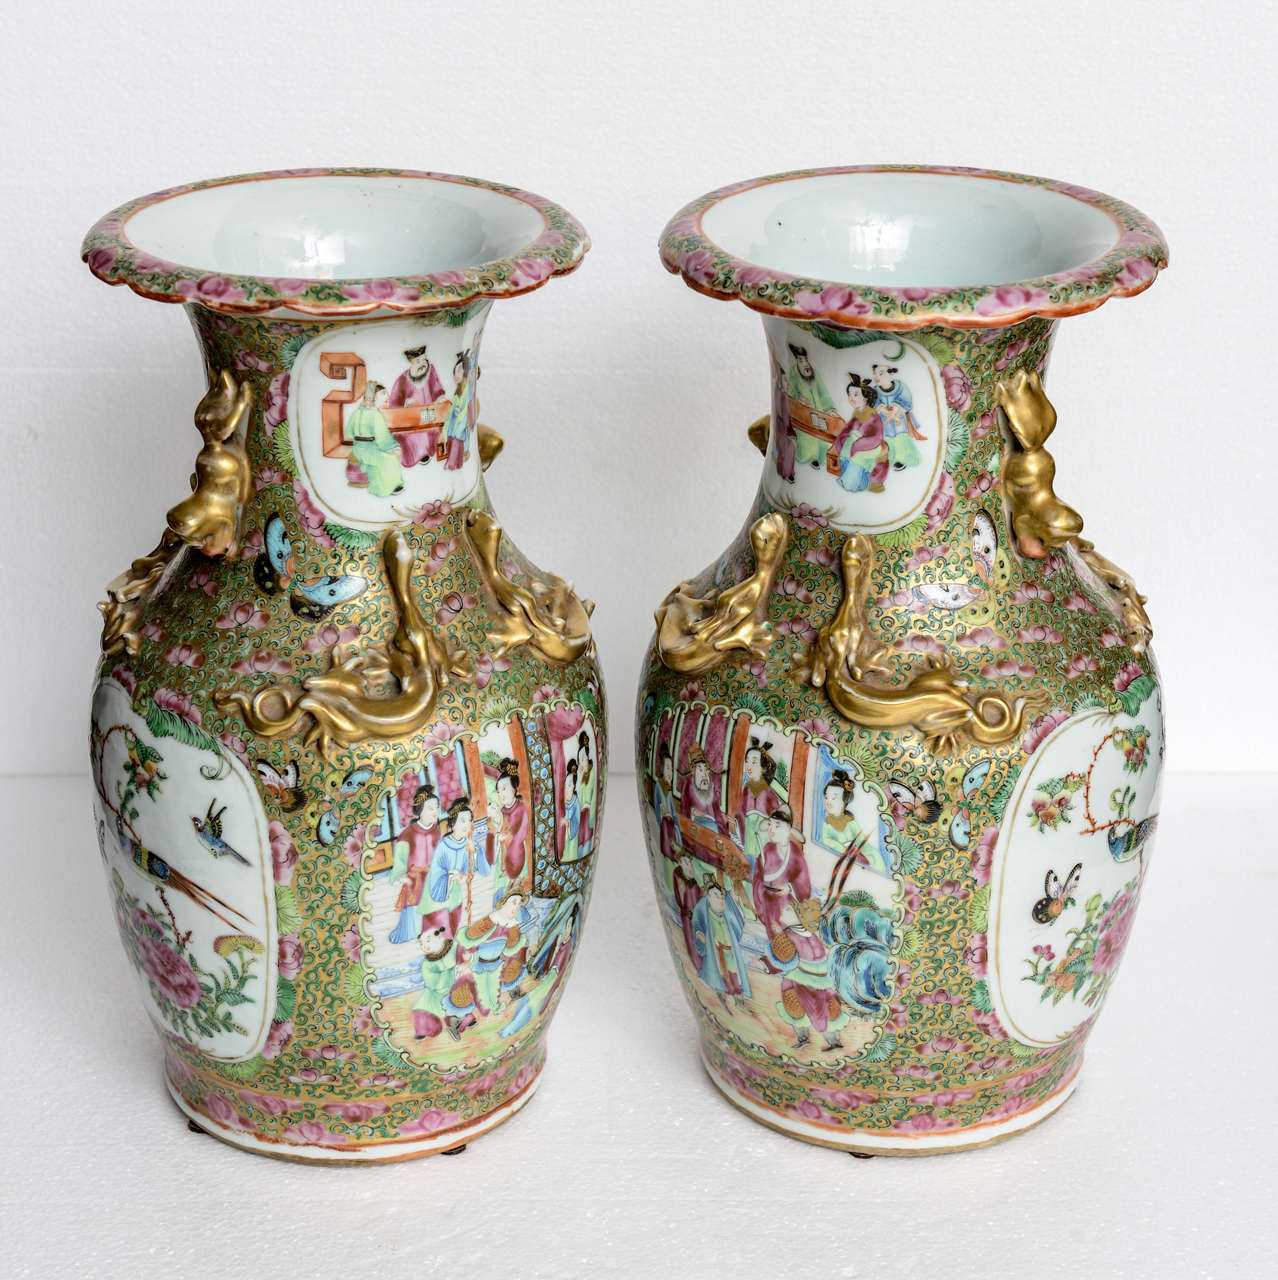 Rare Pair of Chinese Porcelain Famille Rose Vases, 19th Century In Good Condition For Sale In West Palm Beach, FL